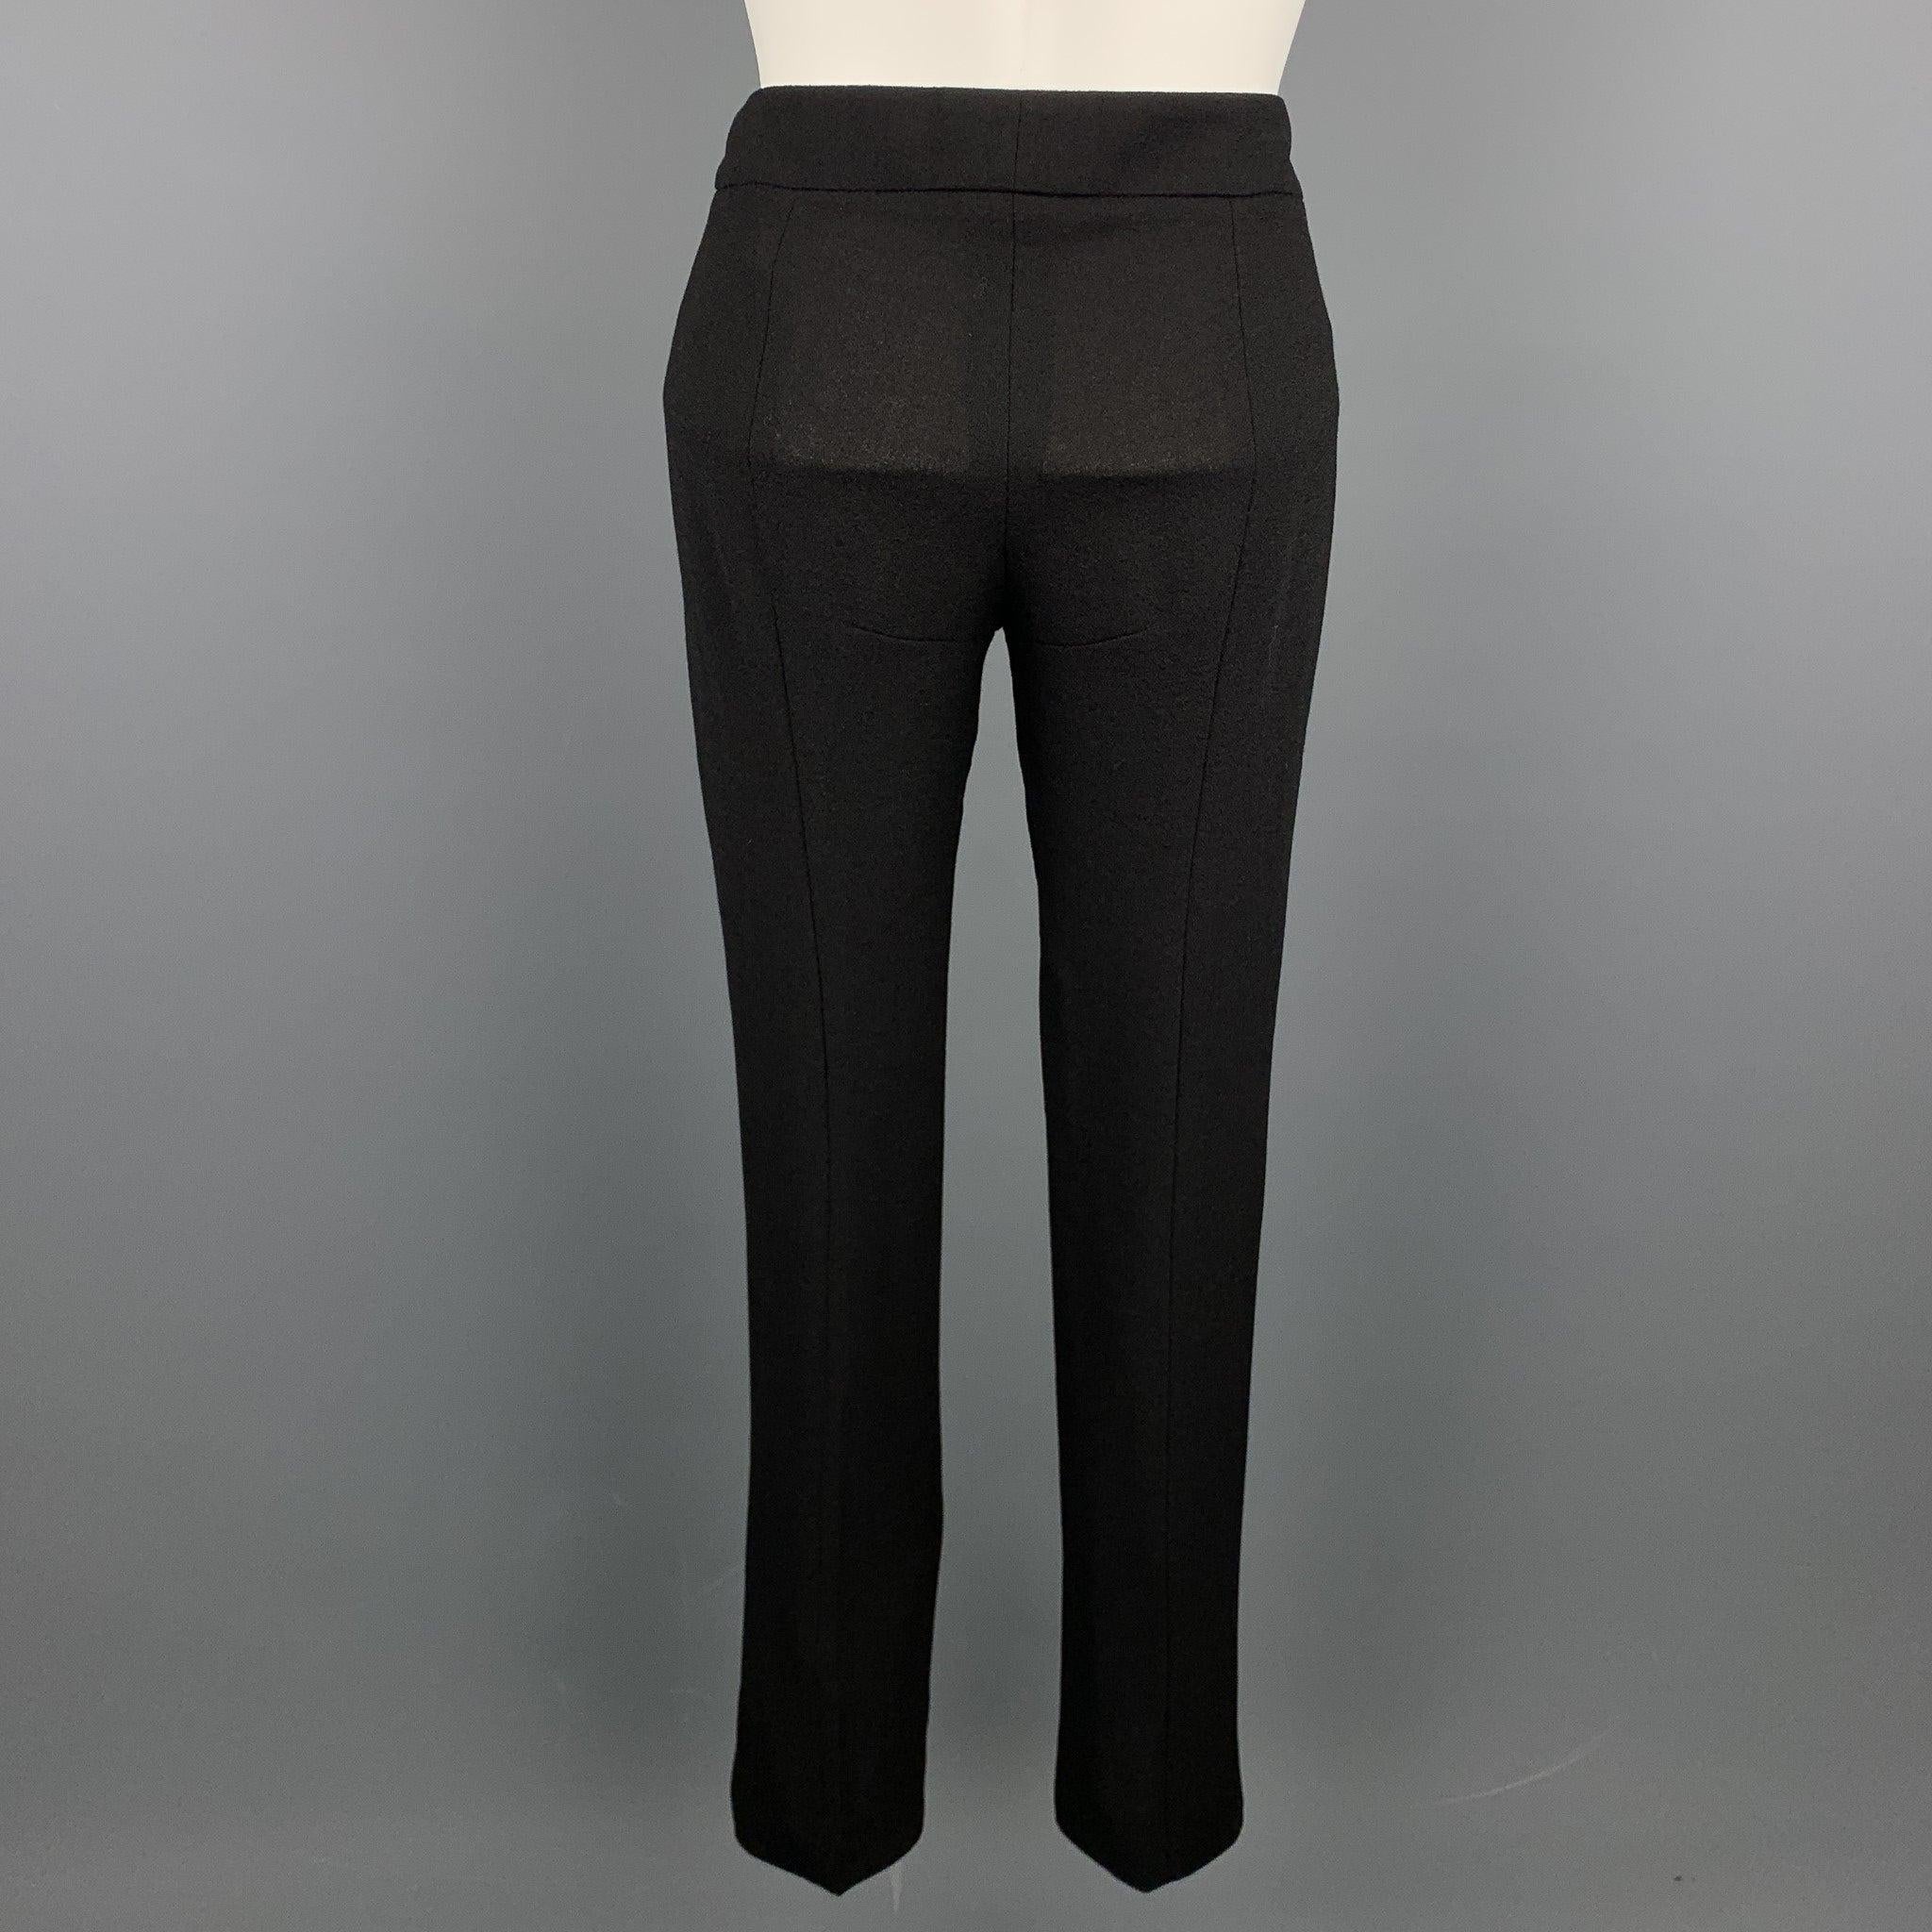 ALEXANDER MCQUEEN Size 2 Black Crepe Straight Leg Dress Pants In Good Condition For Sale In San Francisco, CA